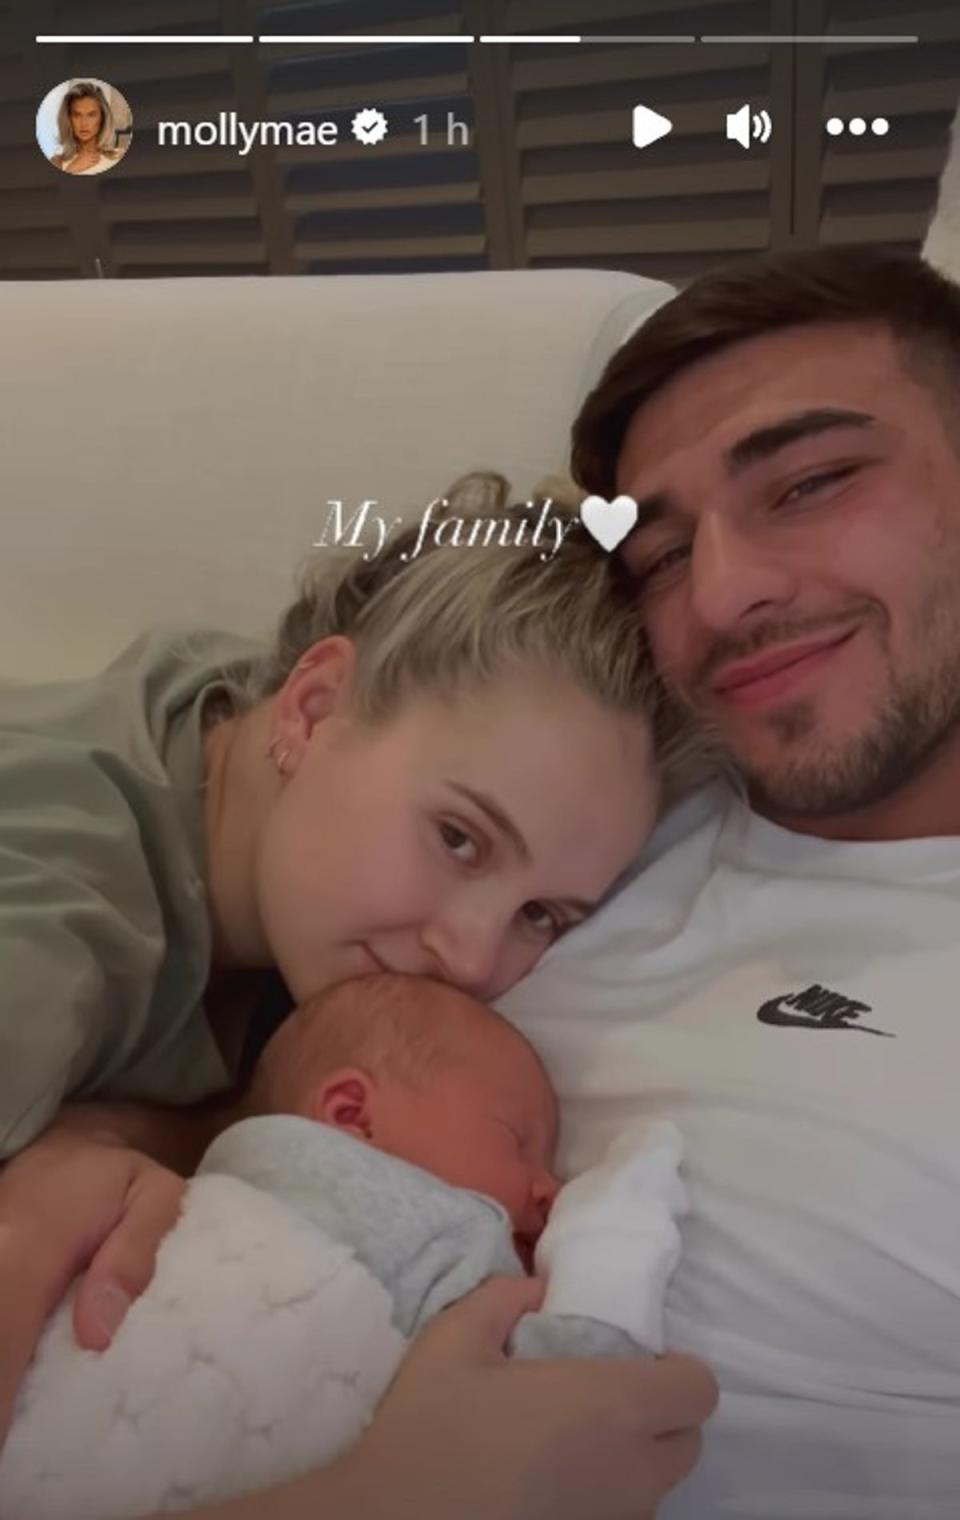 The couple, who met on 2019’s Love Island, are enjoying new parenthood (Instagram/MollyMaeHague)